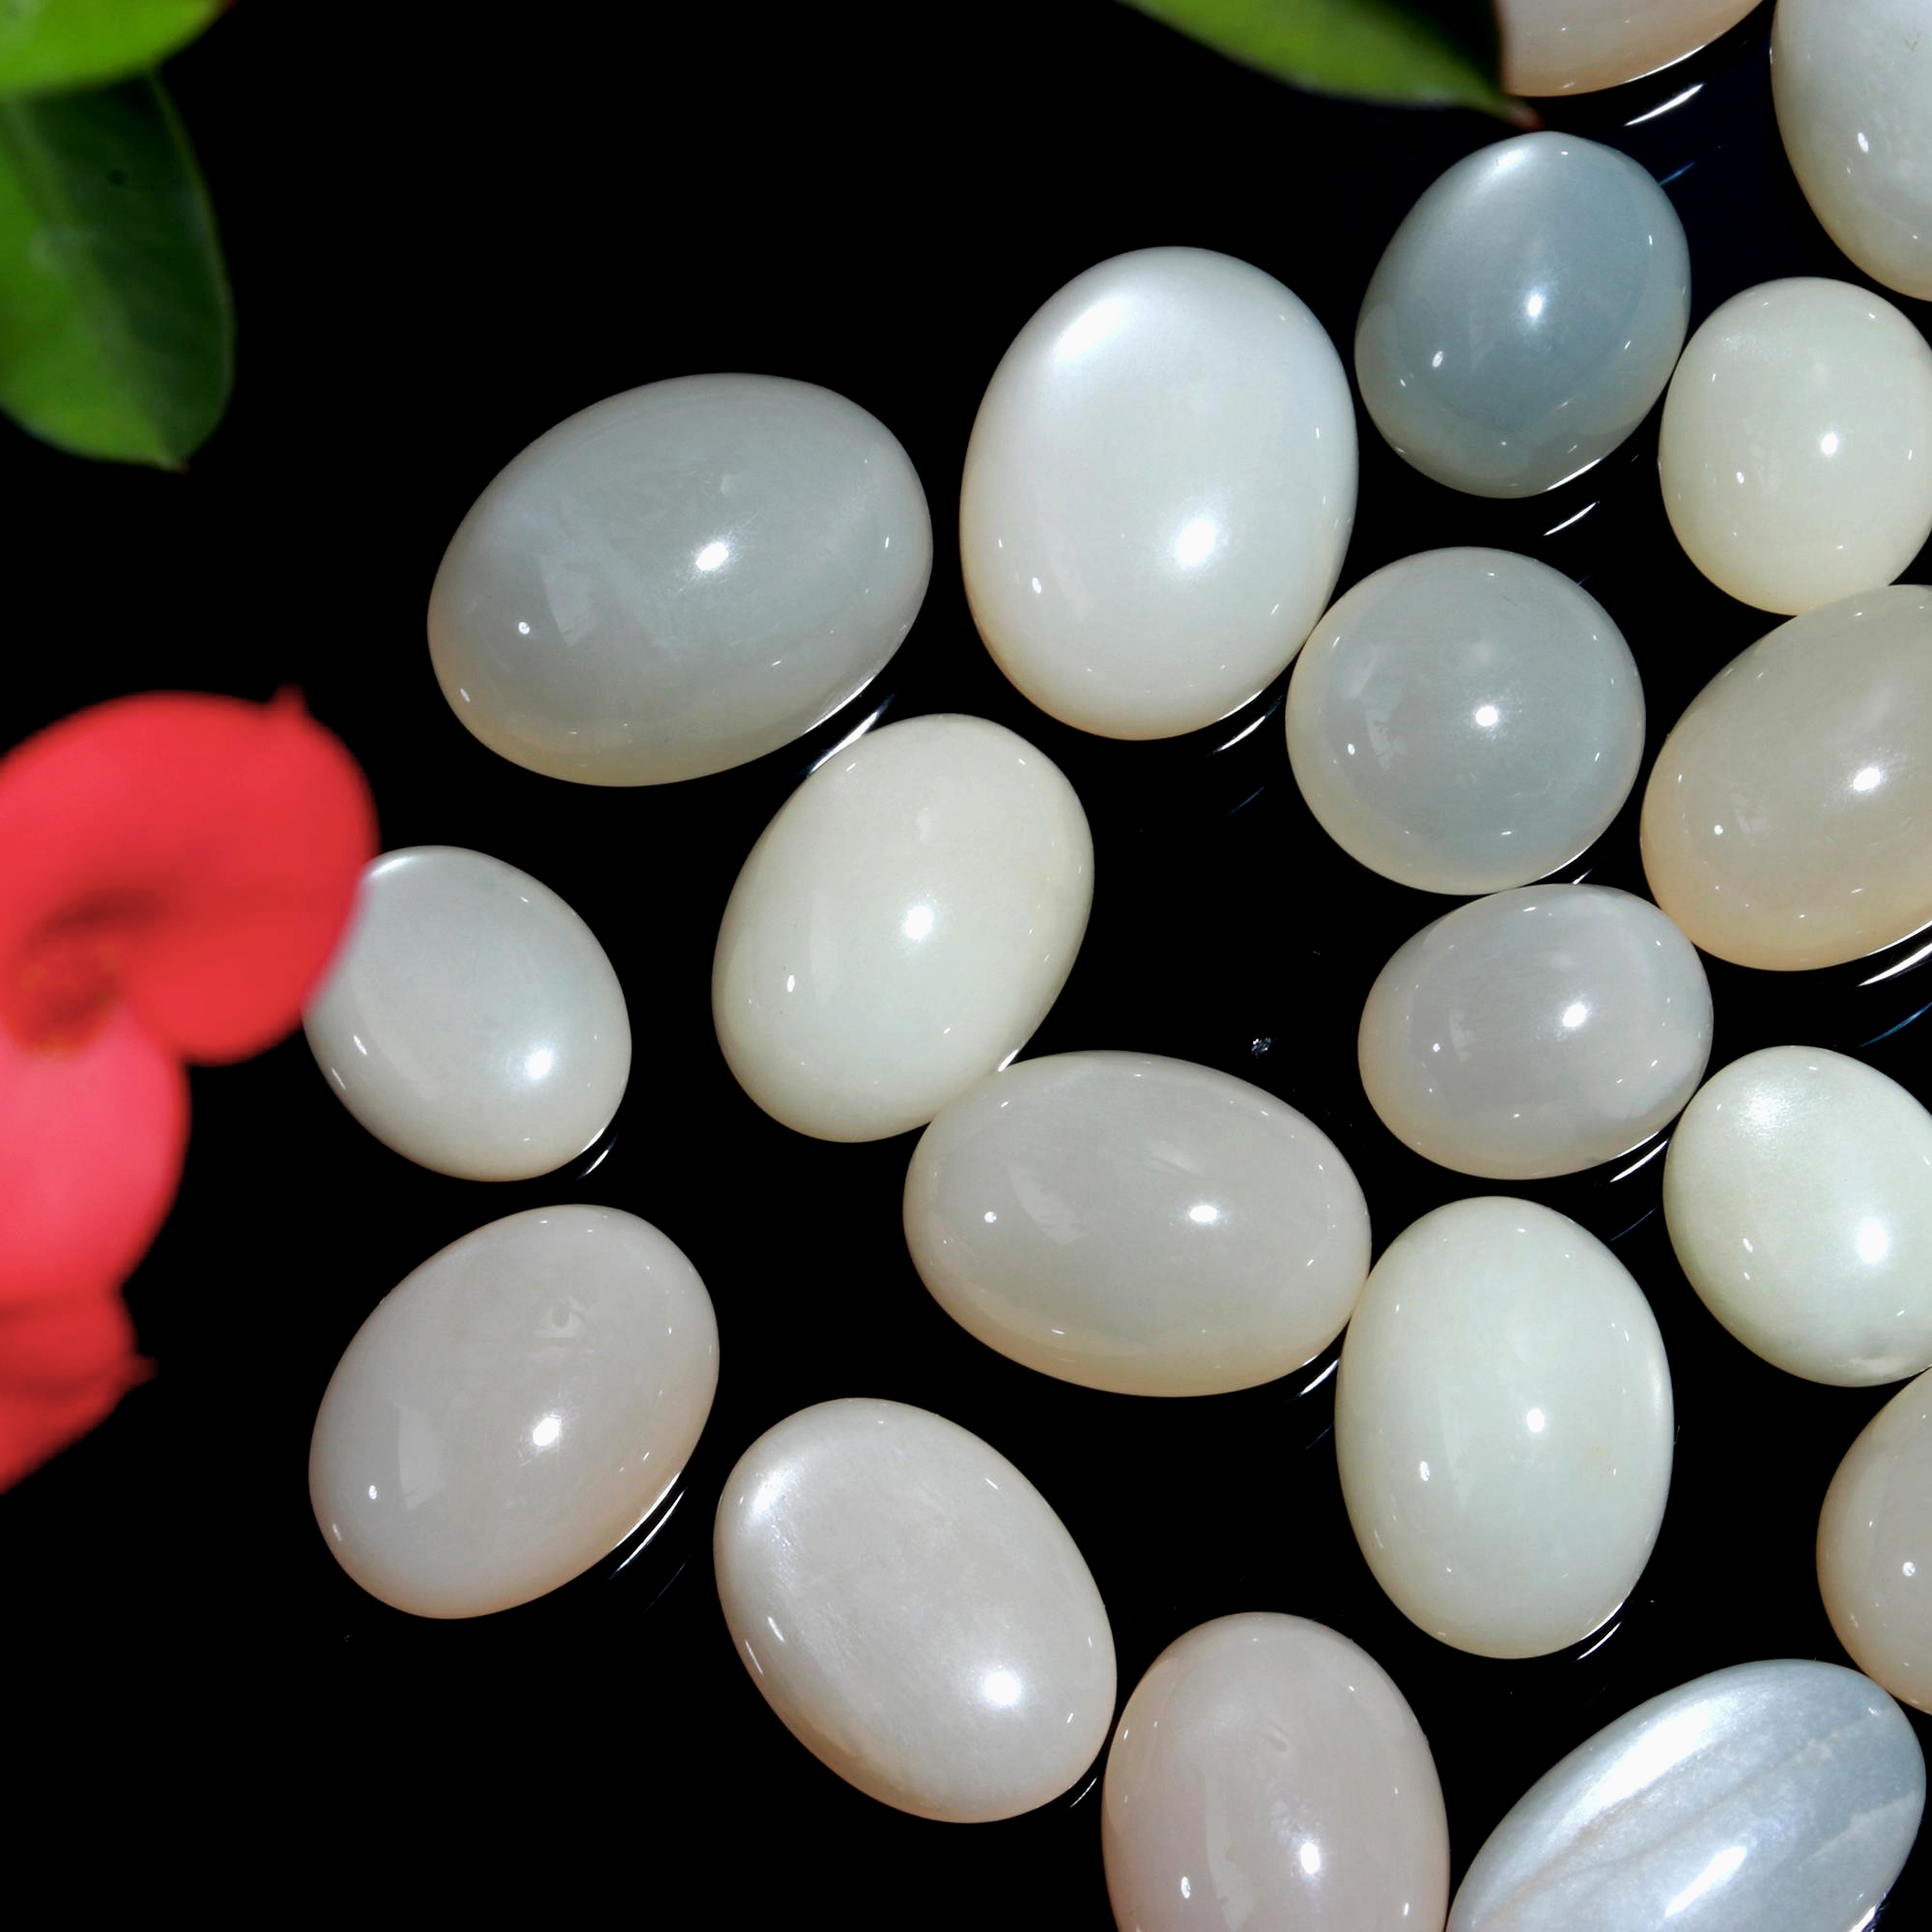 28 Pcs. 152Cts. Natural White Rainbow Moonstone polished Mix Cabochon Wholesale Loose Lot Size 16x12 12x9mm Gemstone for jewelry#1139